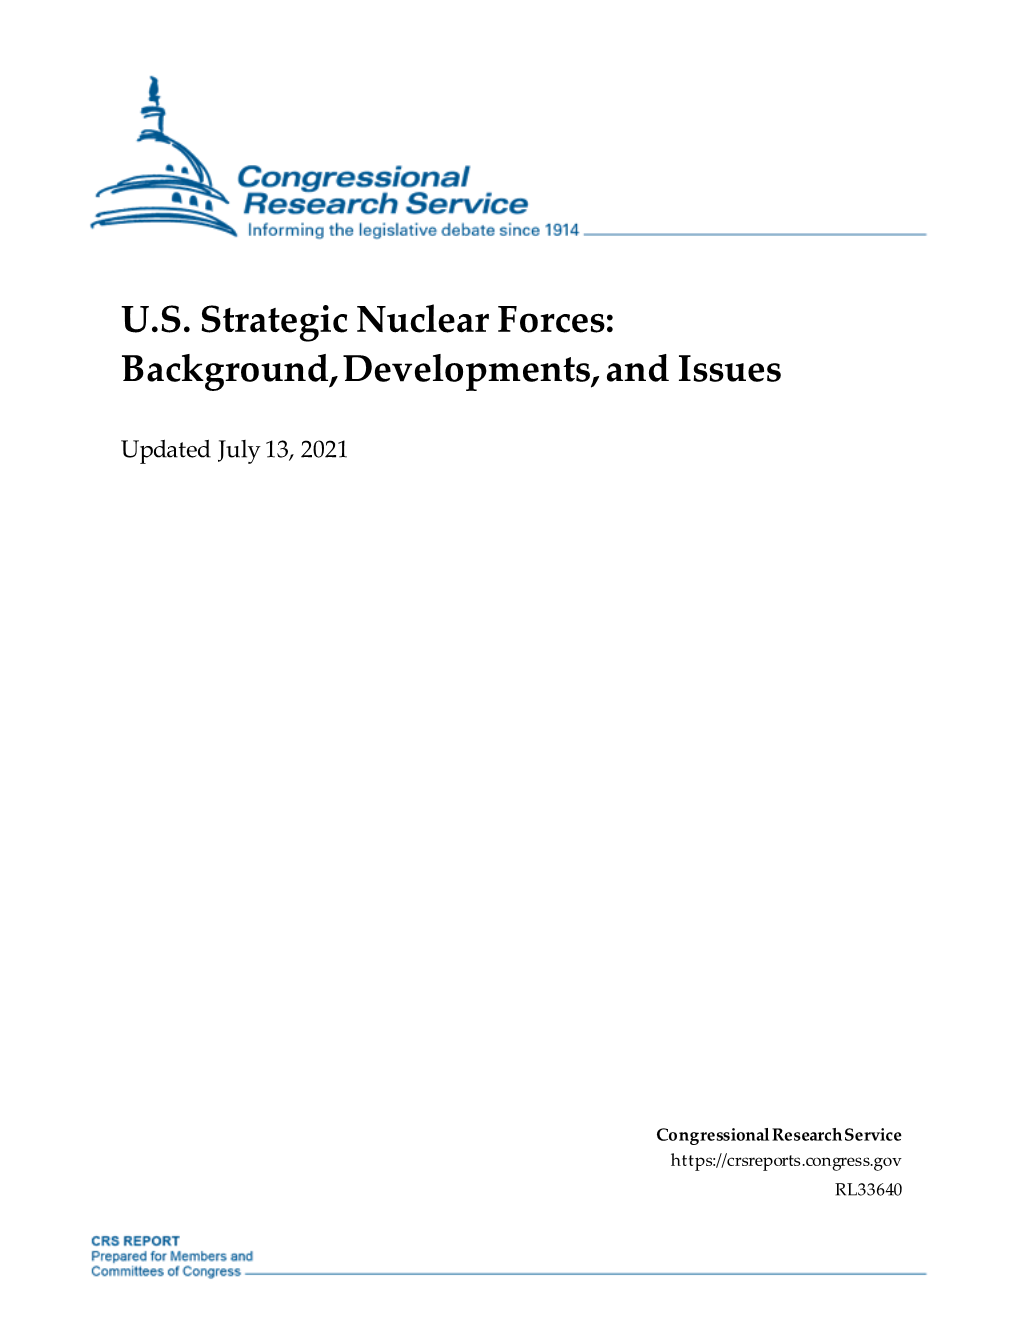 US Strategic Nuclear Forces: Background, Developments